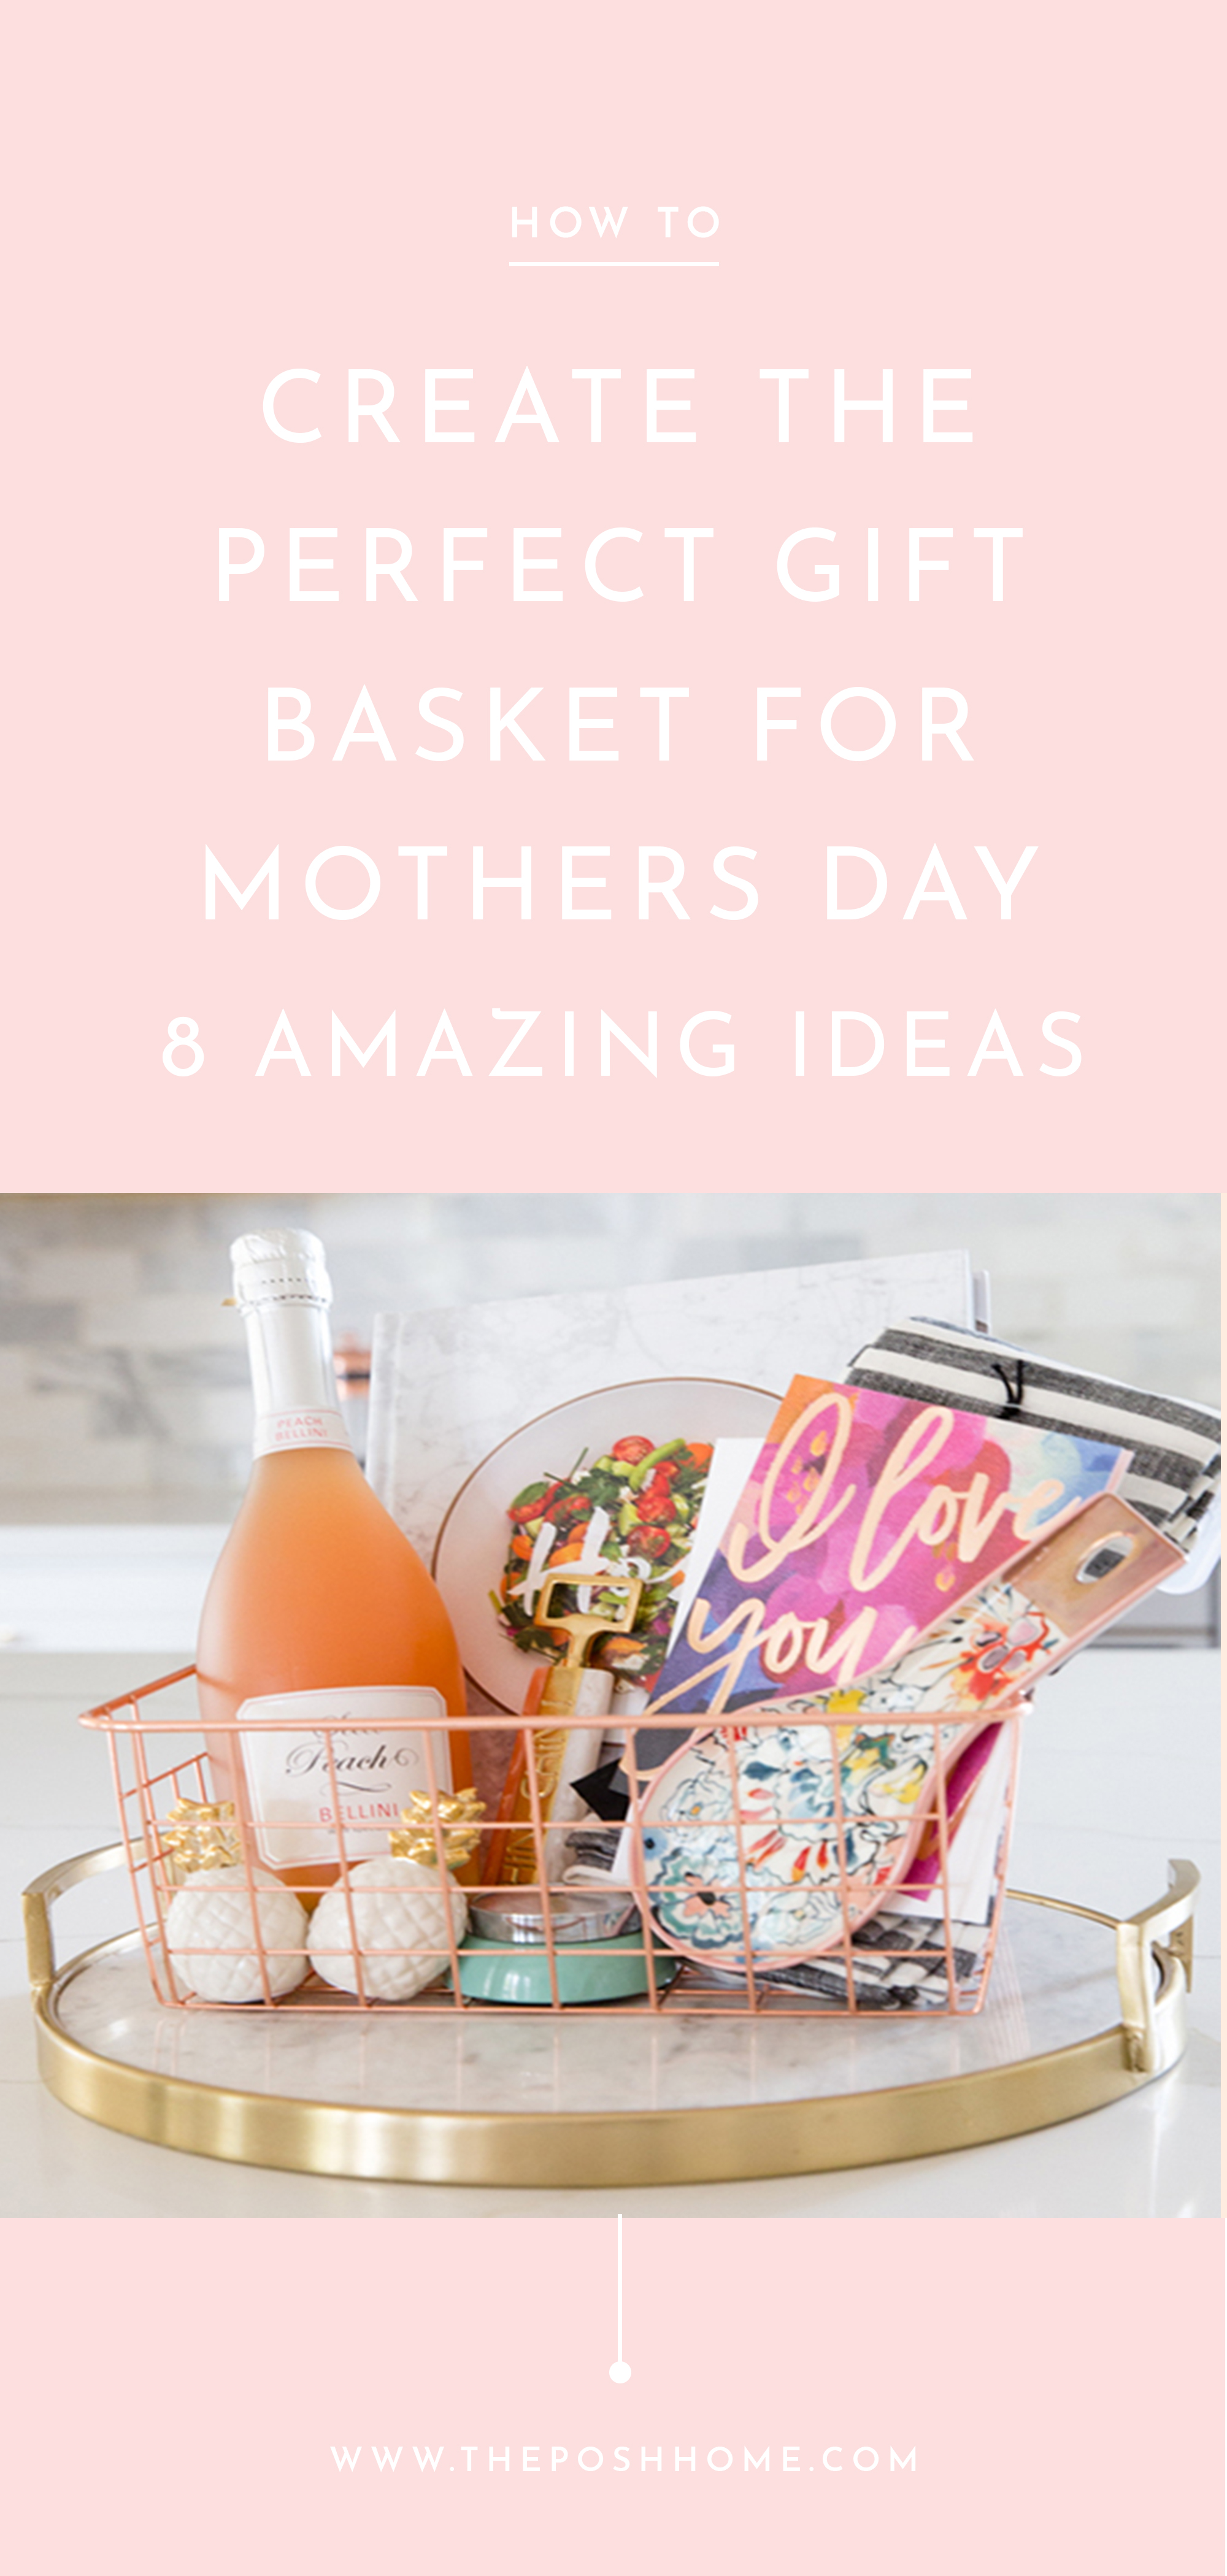 DIY GIFT BASKET IDEAS FOR MOTHERS DAY